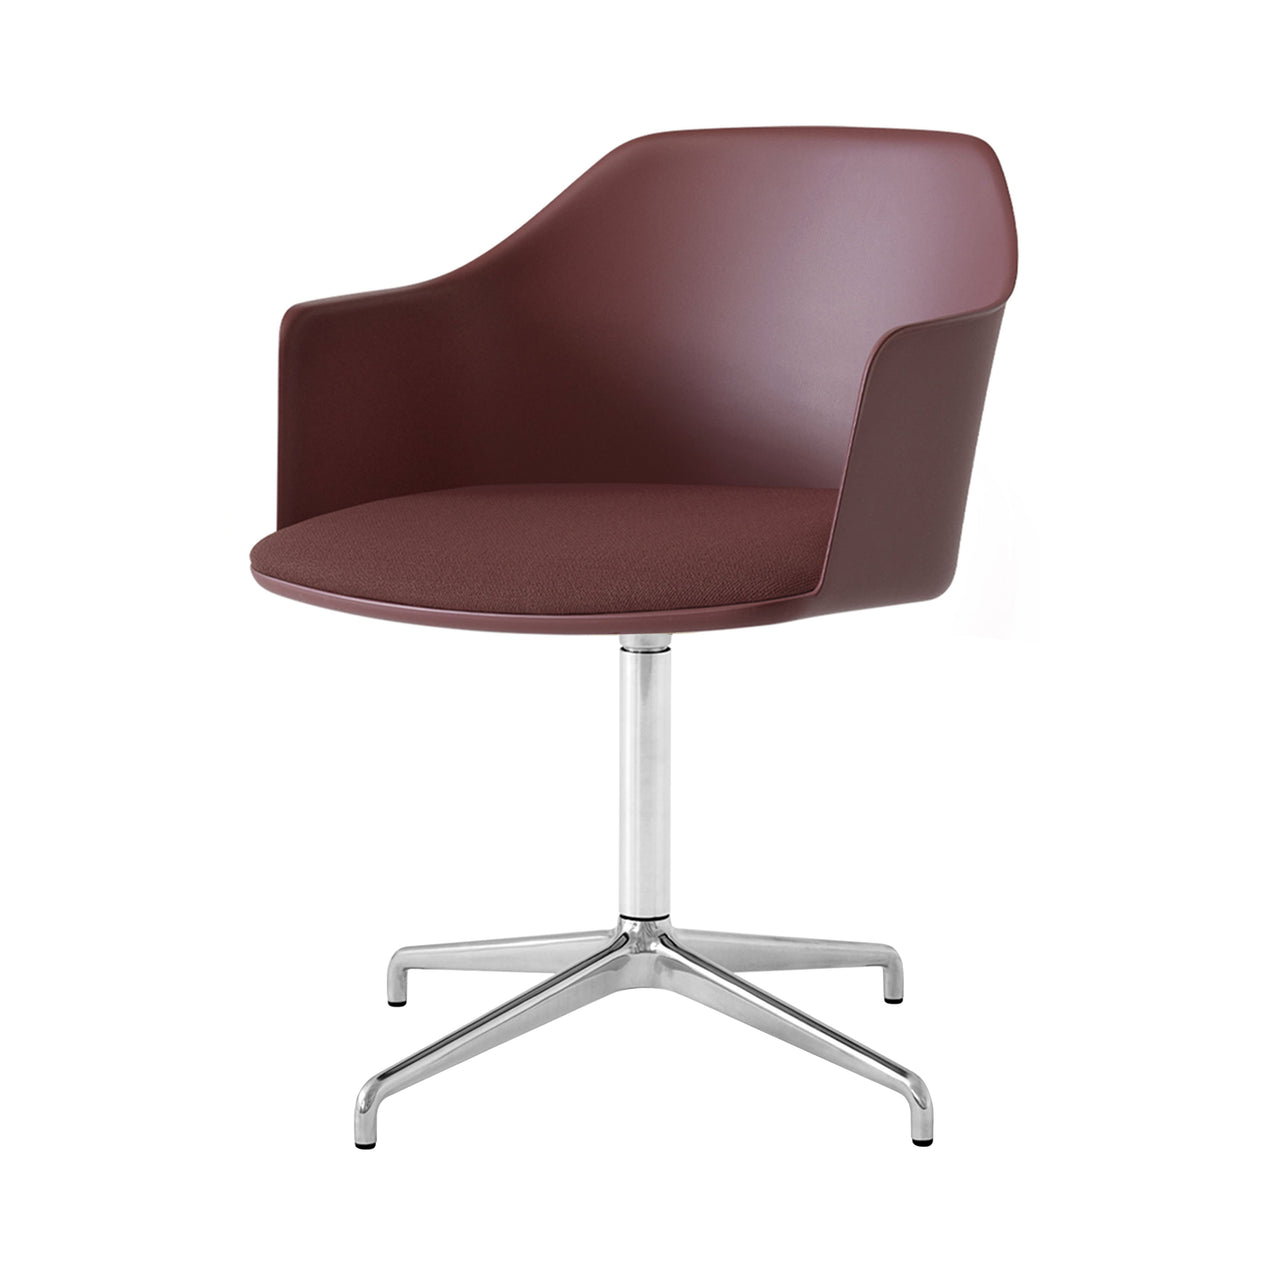 Rely Chair HW39: Polished Aluminum + Red Brown